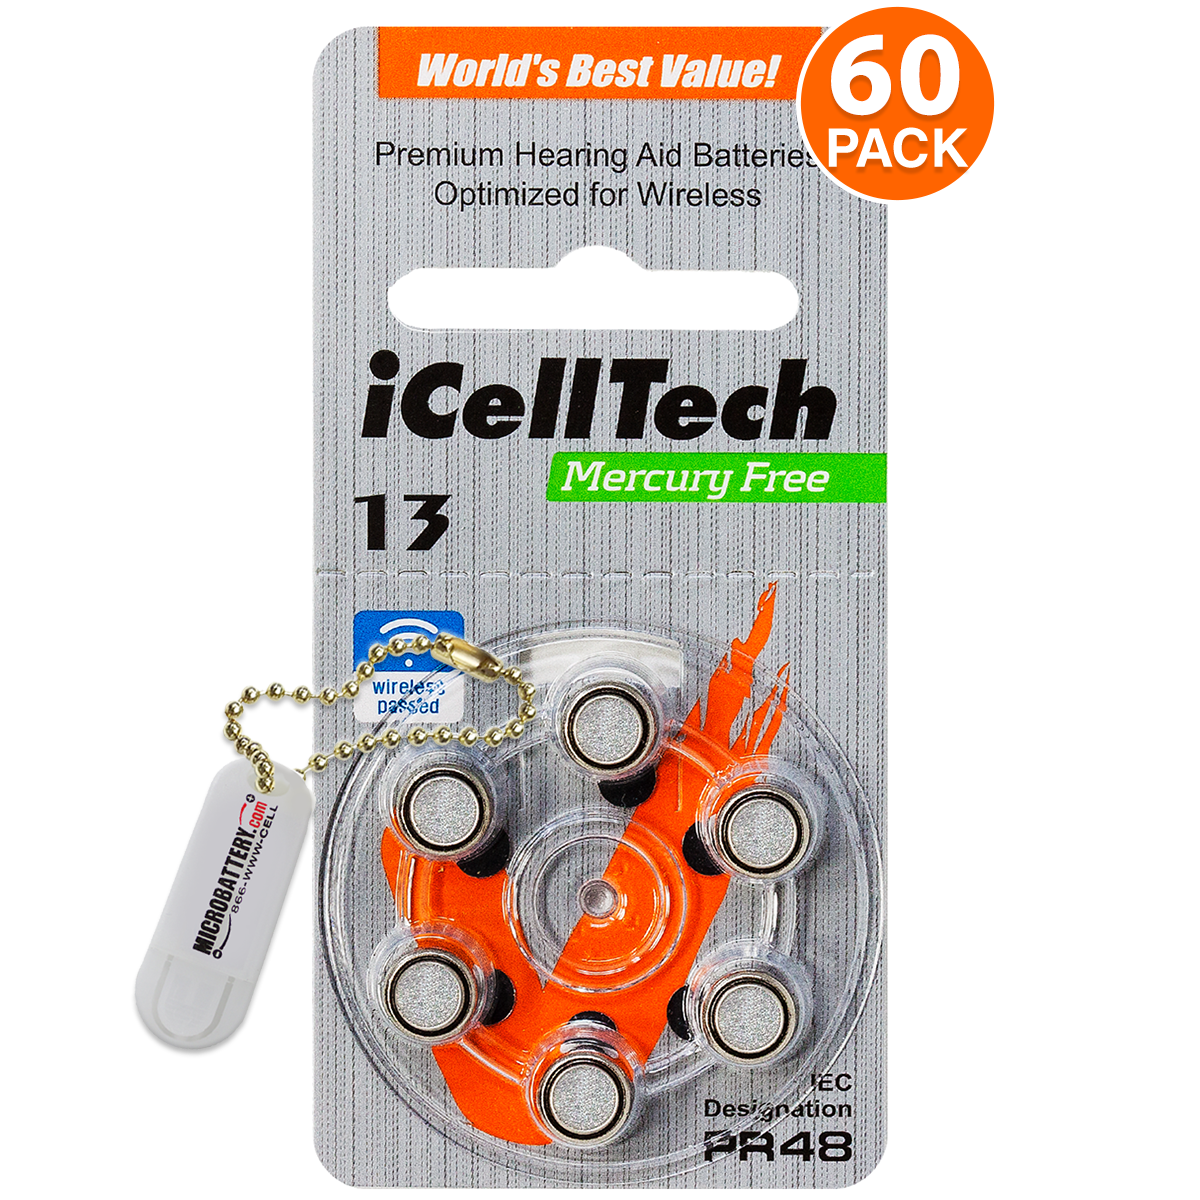 Icelltech Size 13 P13 Hearing Aid Batteries + Free Battery Buddy (60 Pack)